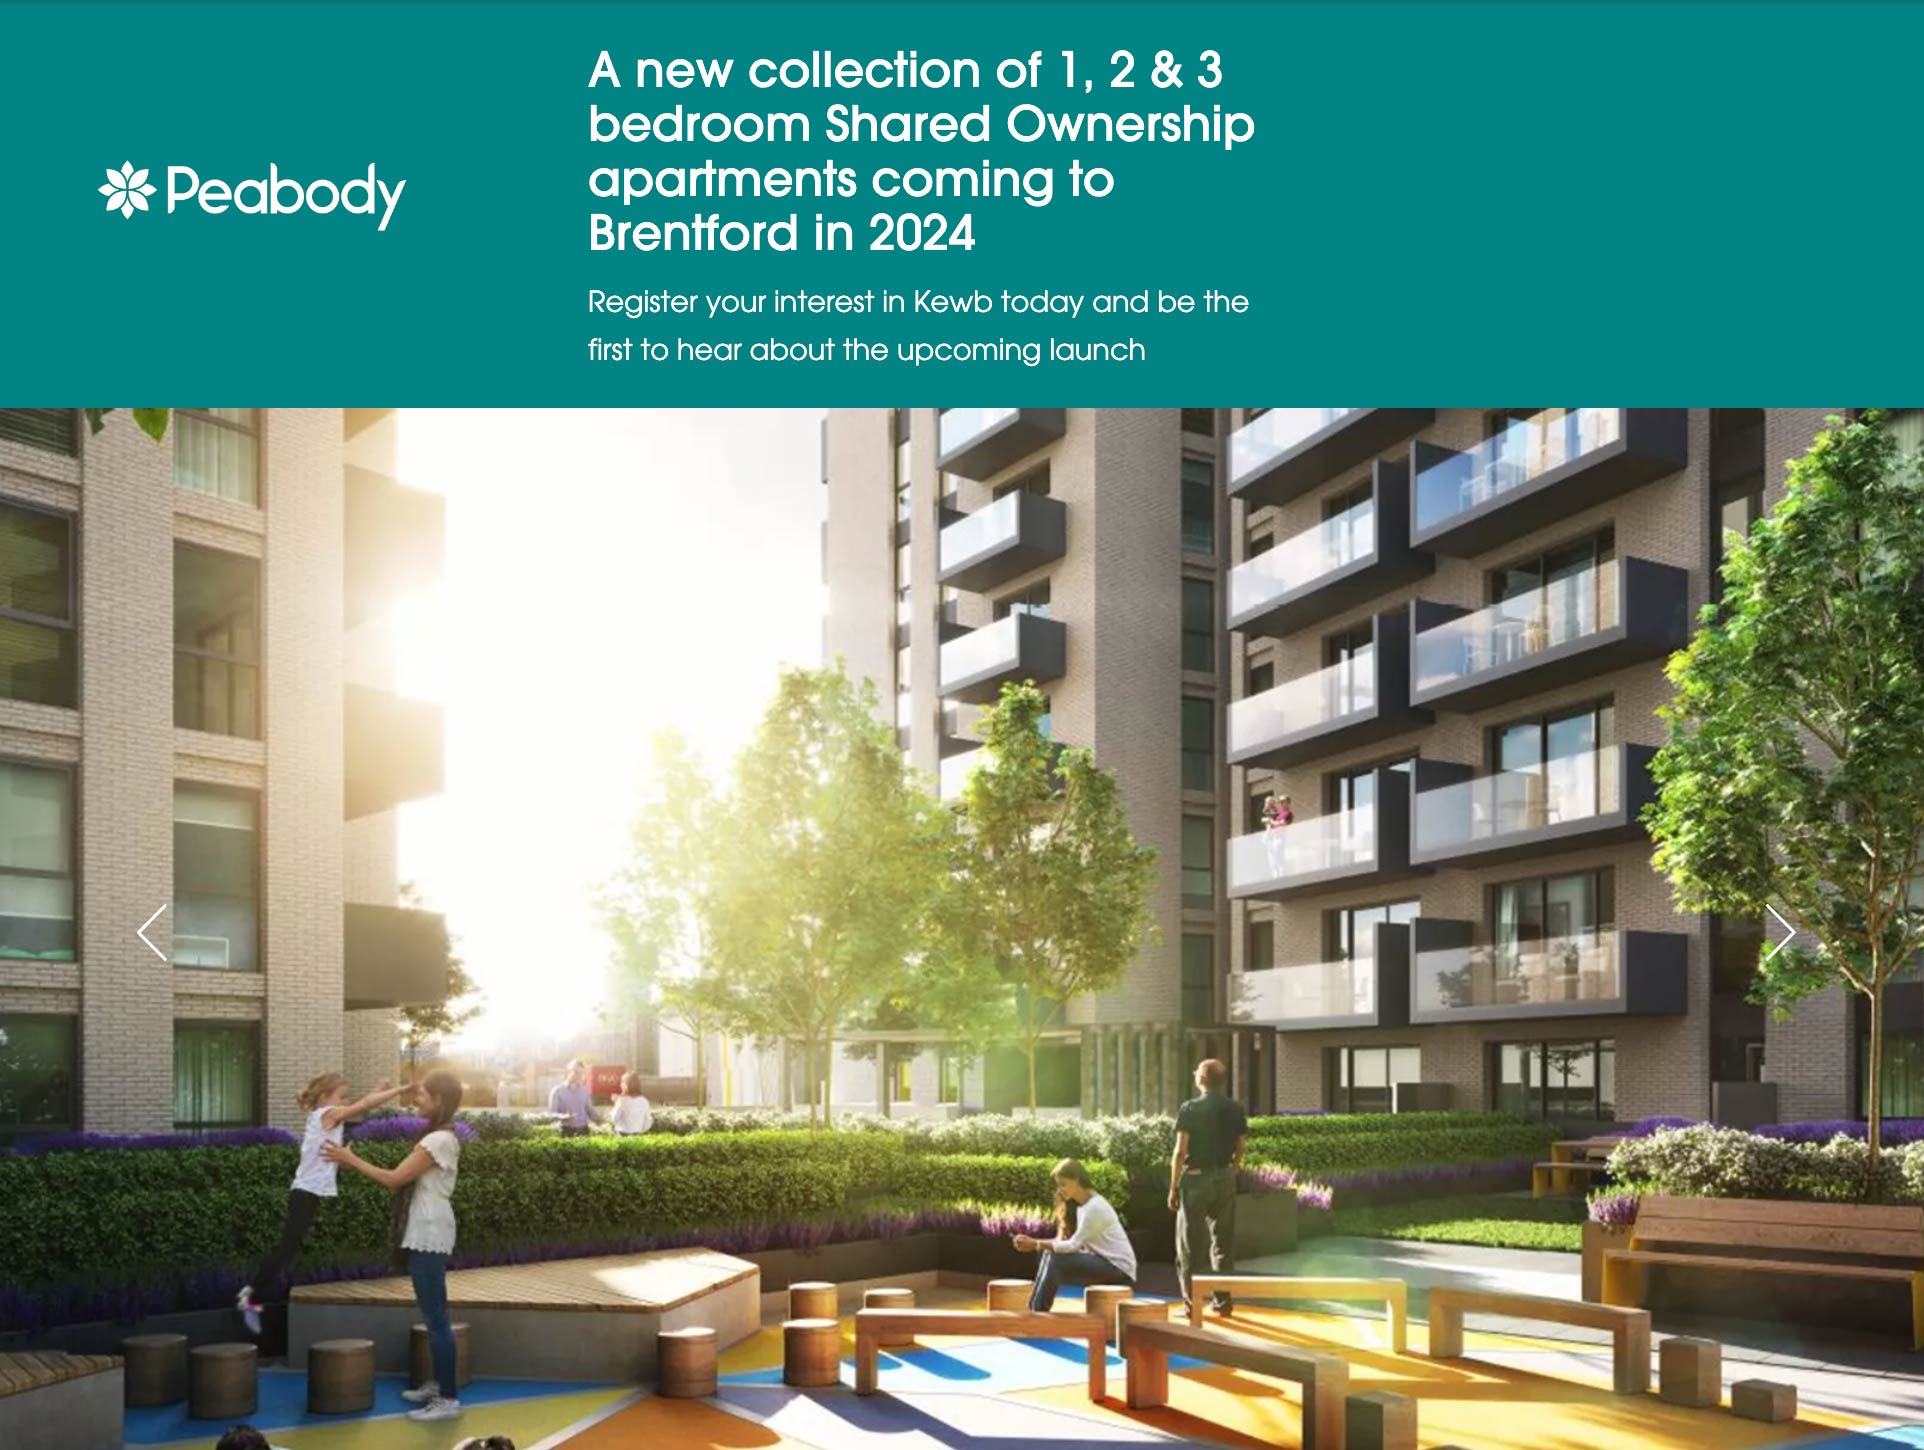 Coming soon - KEWB Shared Ownership homes launching in 2024